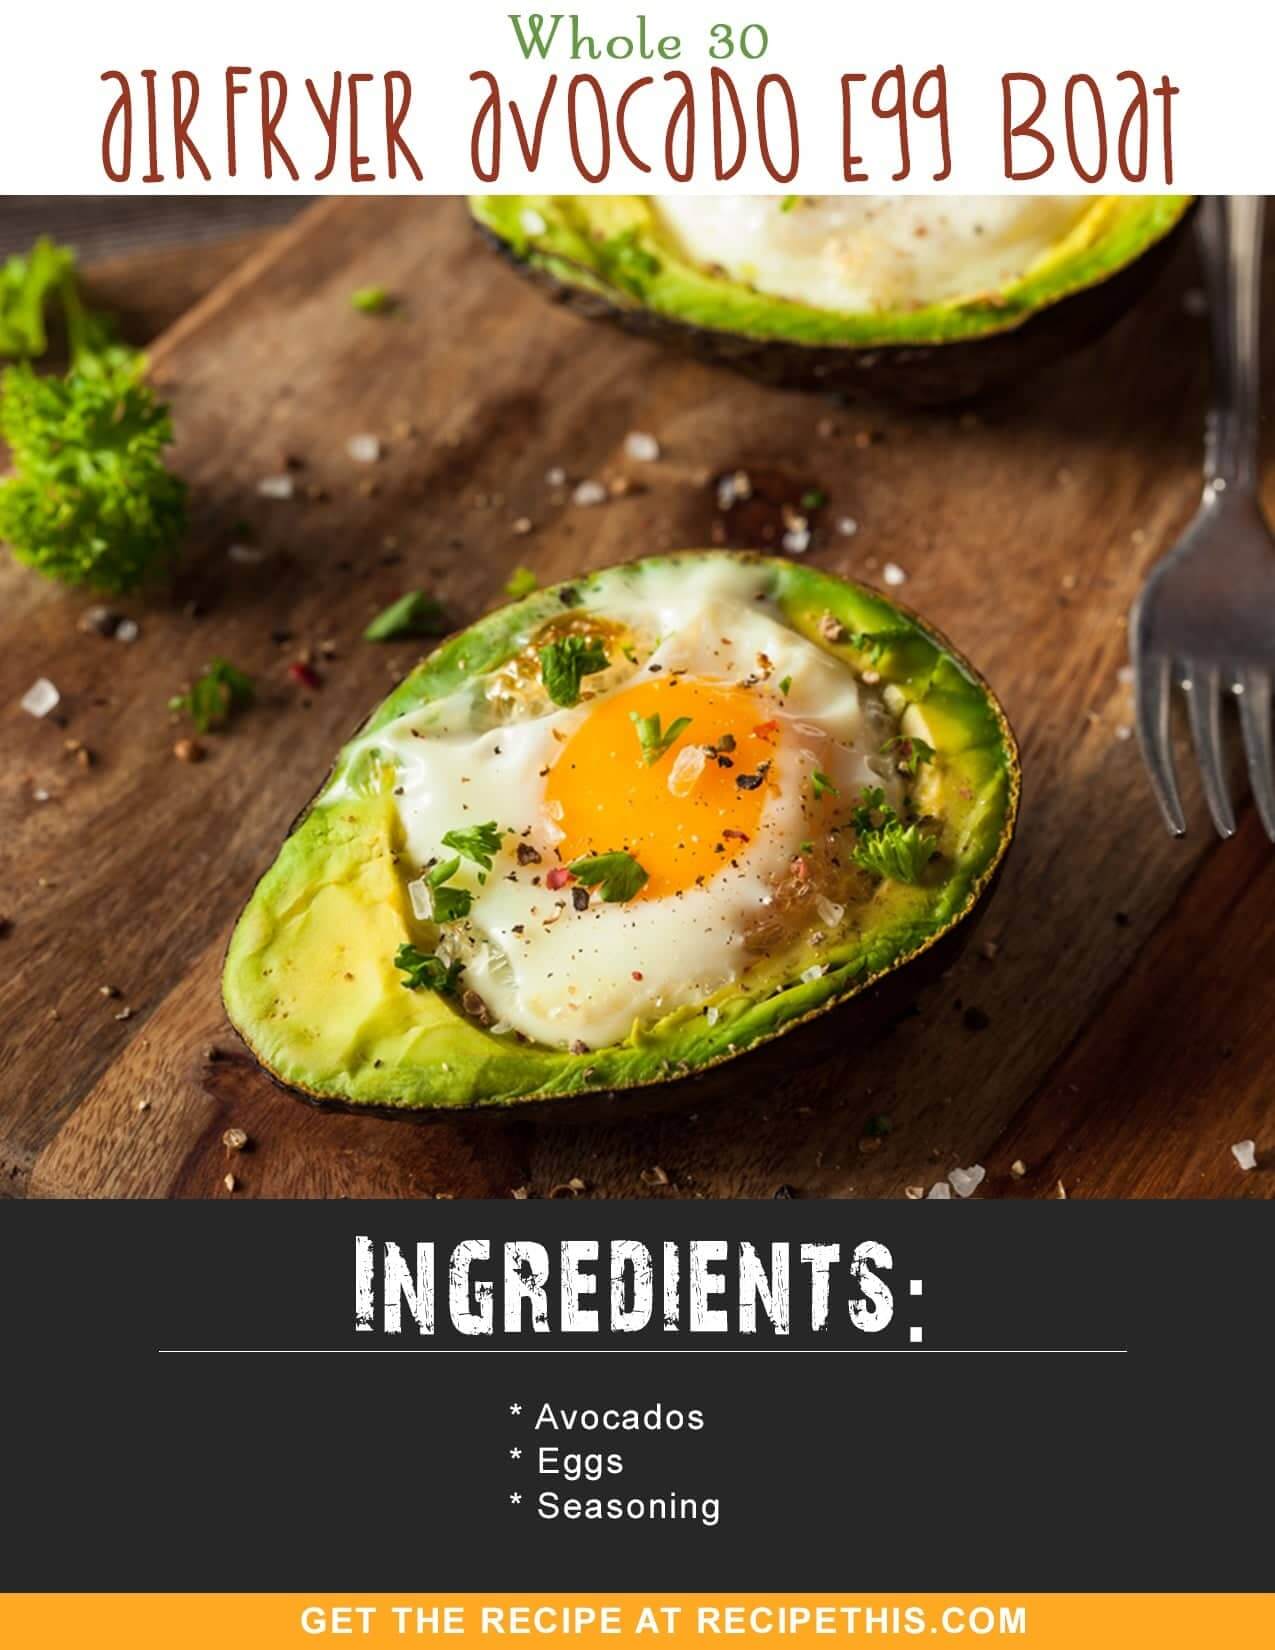 Whole 30 | Whole 30 Airfryer Avocado Egg Boat Recipe from RecipeThis.com